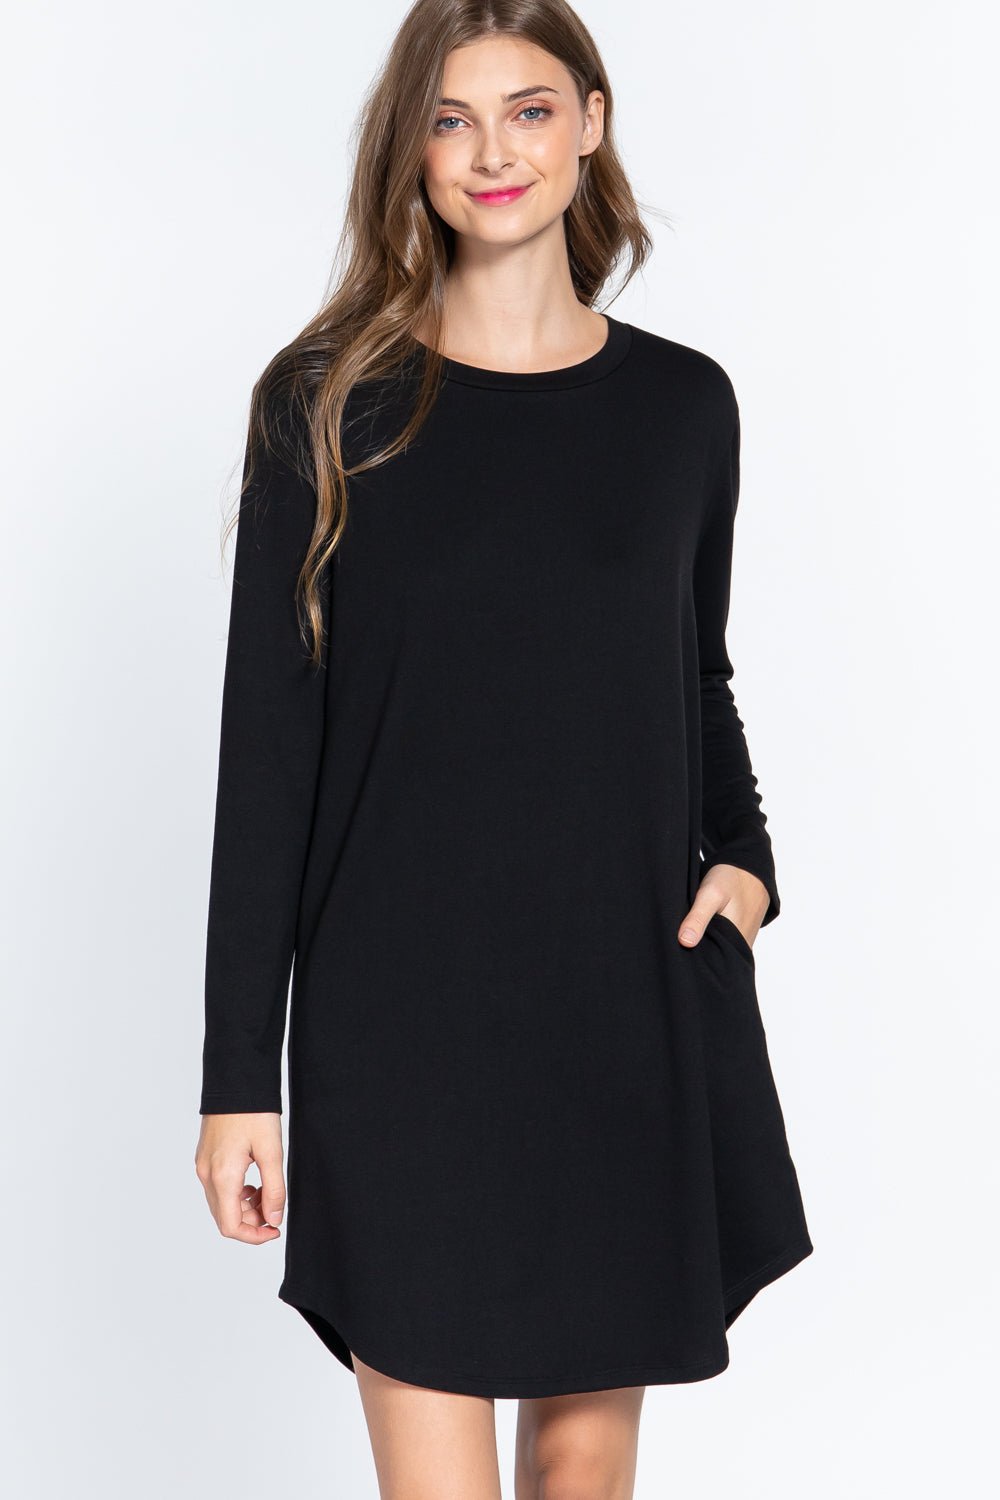 Our Best 65% Polyester 31% Rayon 4% Spandex Long Sleeve Round Neck French Terry Mini Dress (Black)